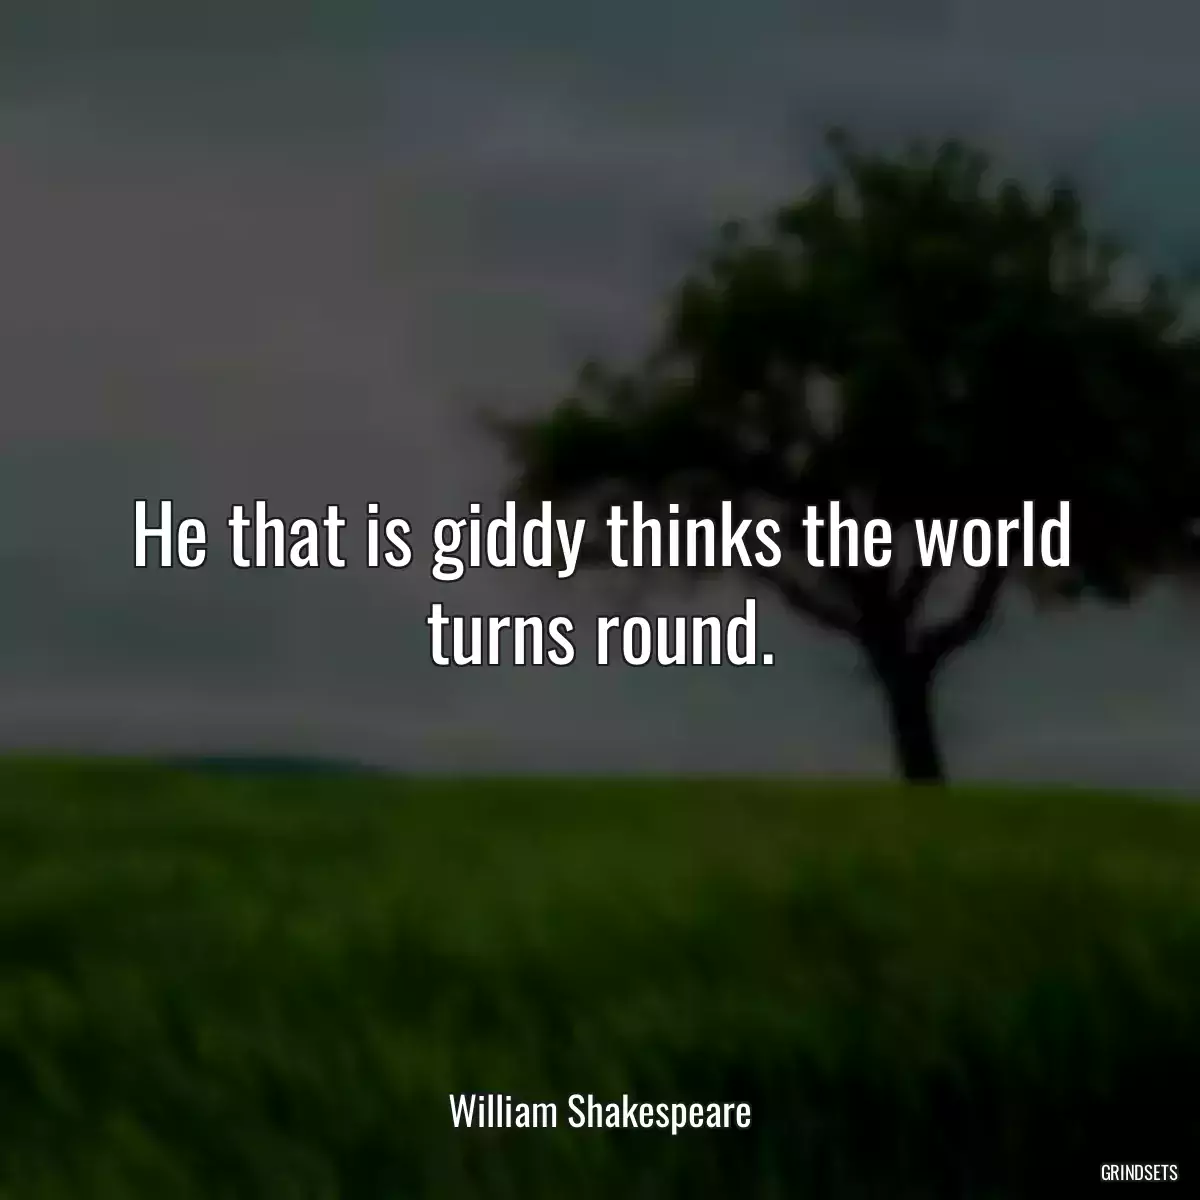 He that is giddy thinks the world turns round.